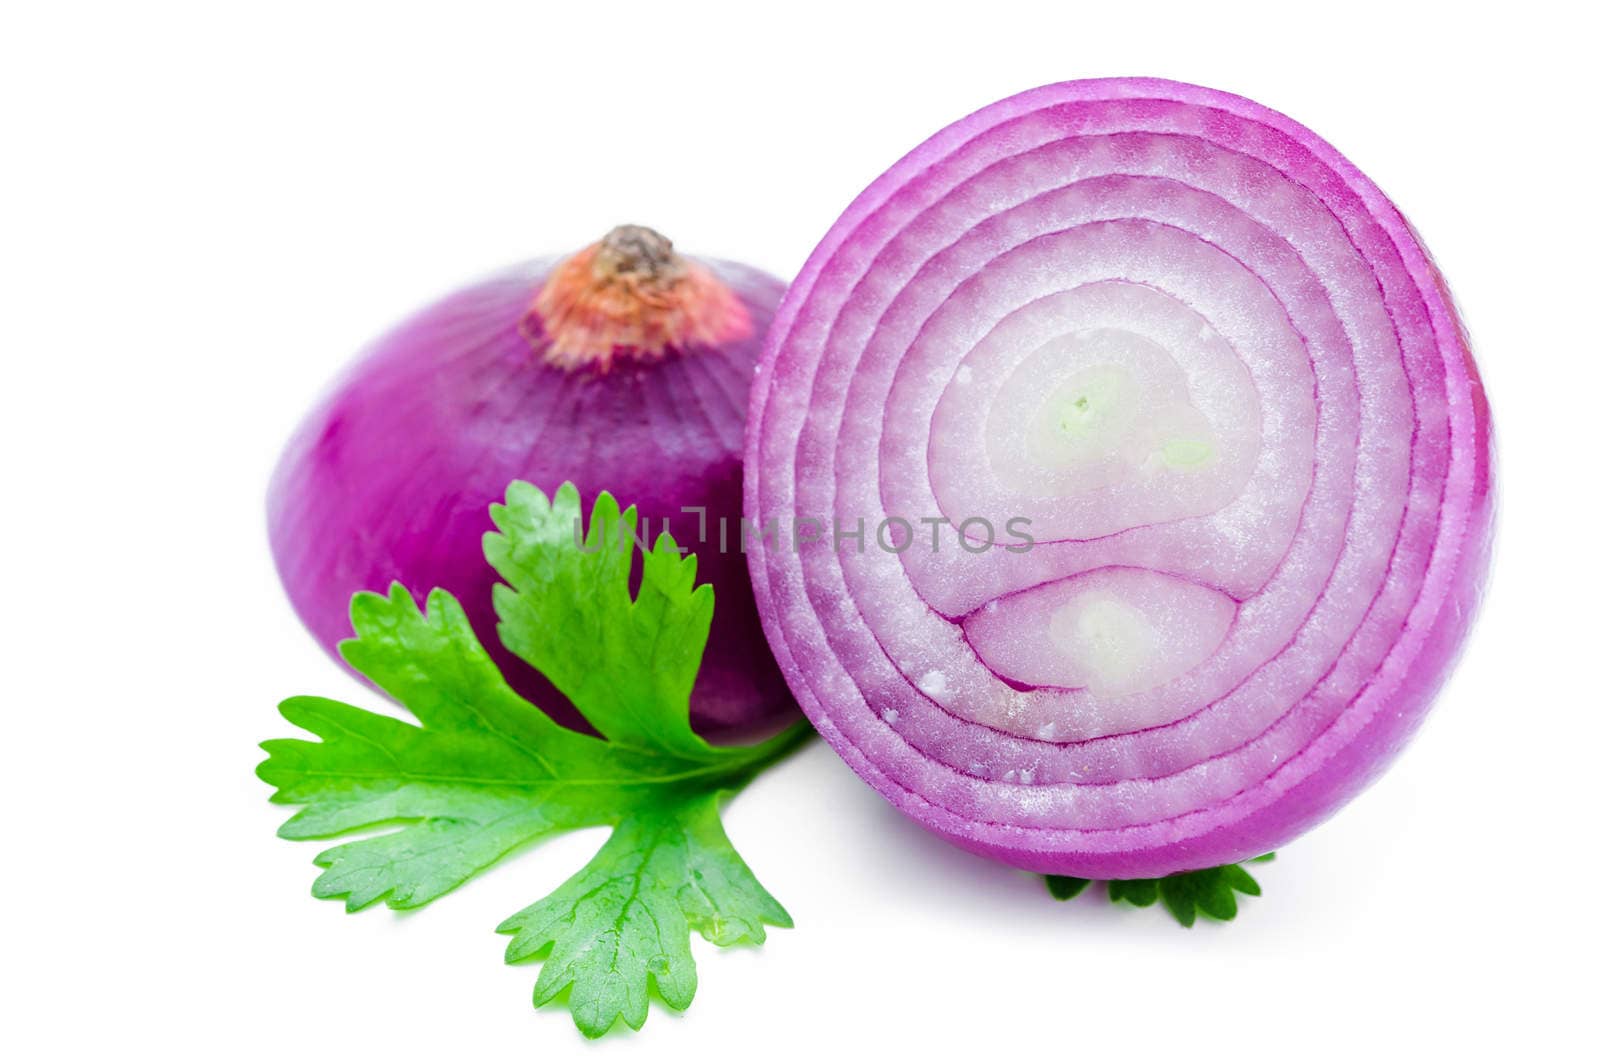 Red sliced onion with green leaf isolated on white background